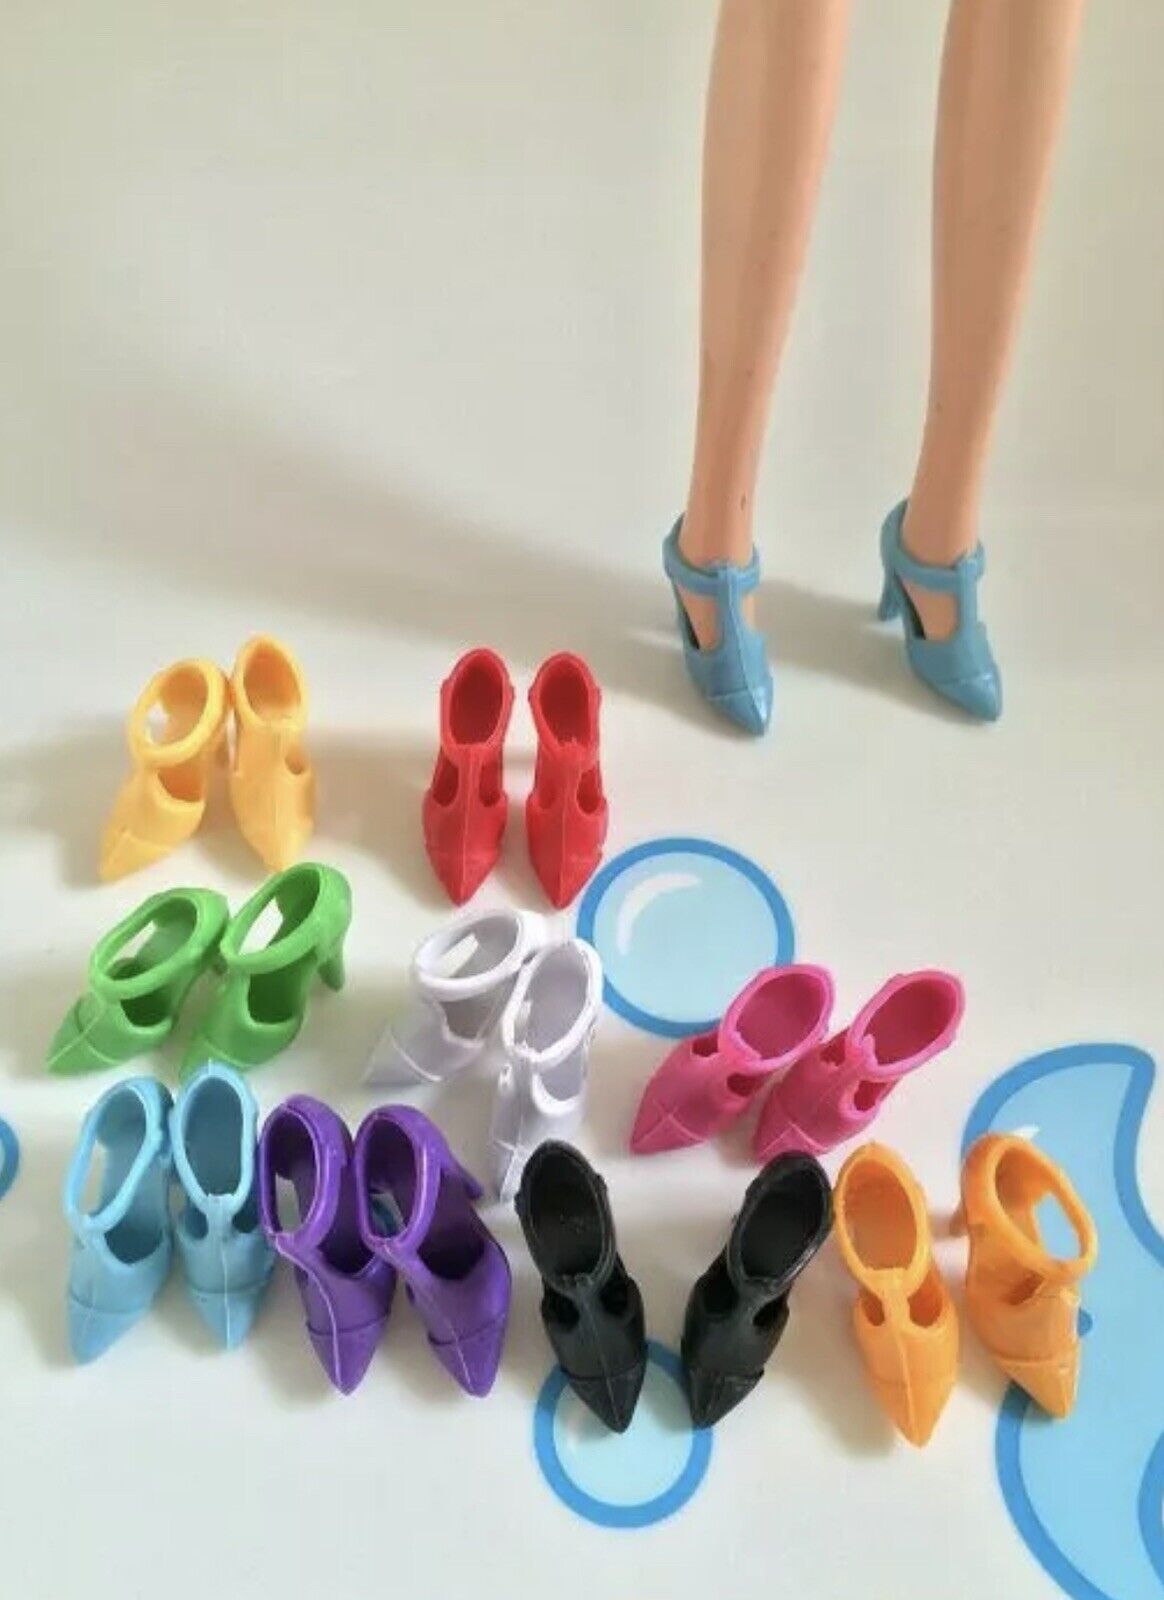 40 Pairs 7 colour High Heel  pliable silicone Shoes for11.5" (30CM) Doll F5 Unbranded